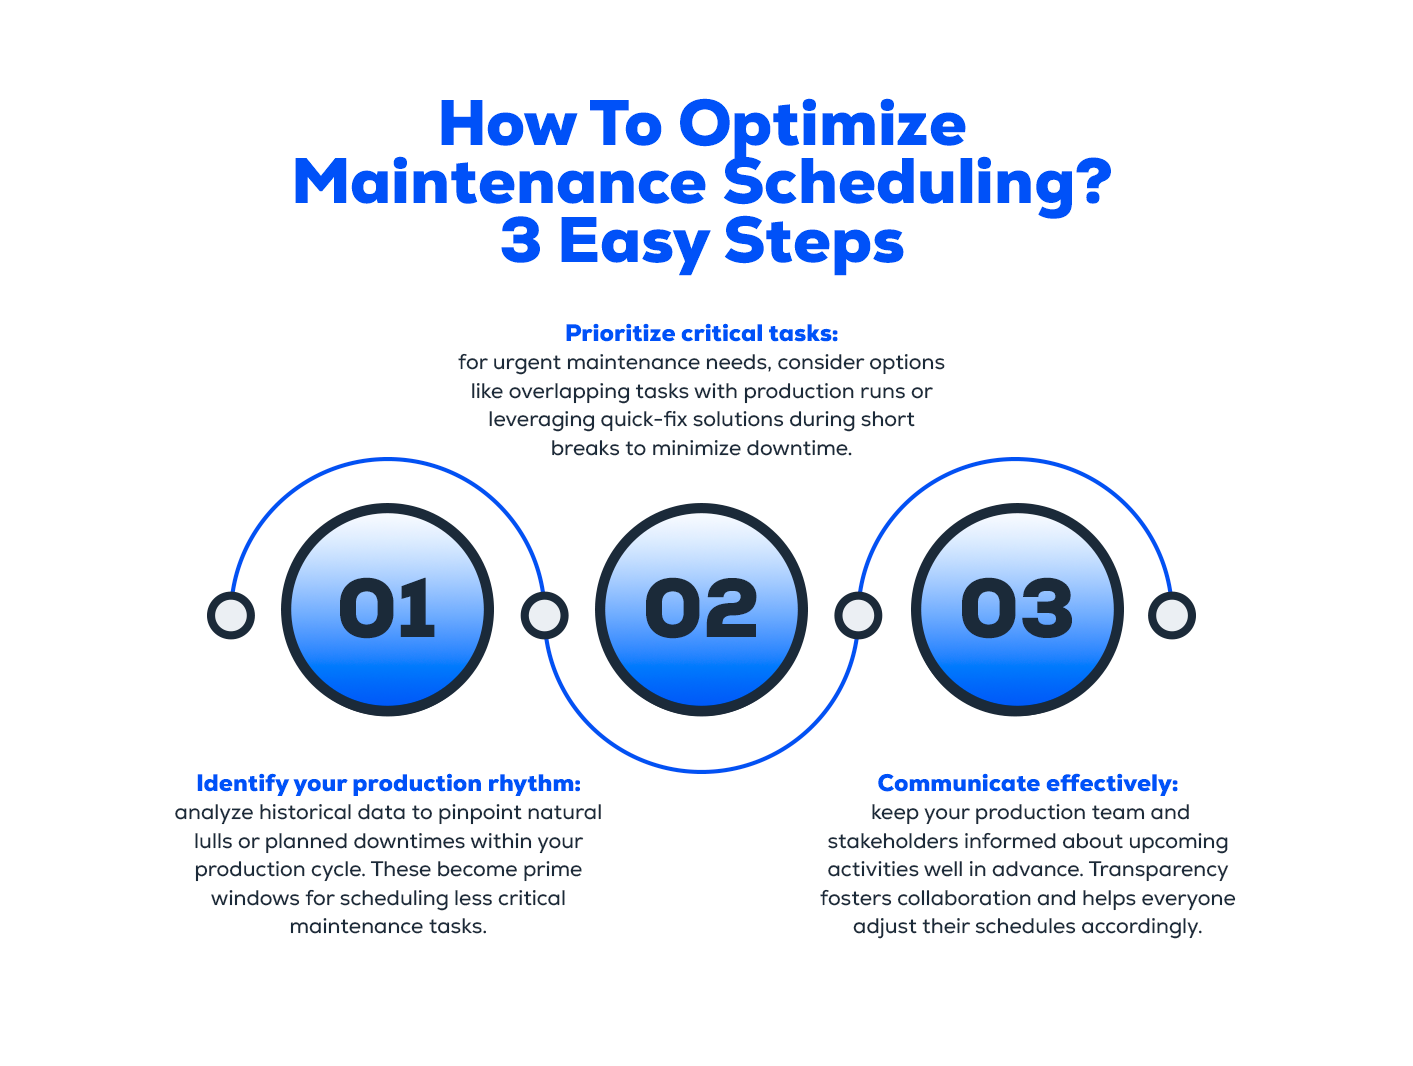 How to Optimize Maintenance Scheduling: 3 easy steps